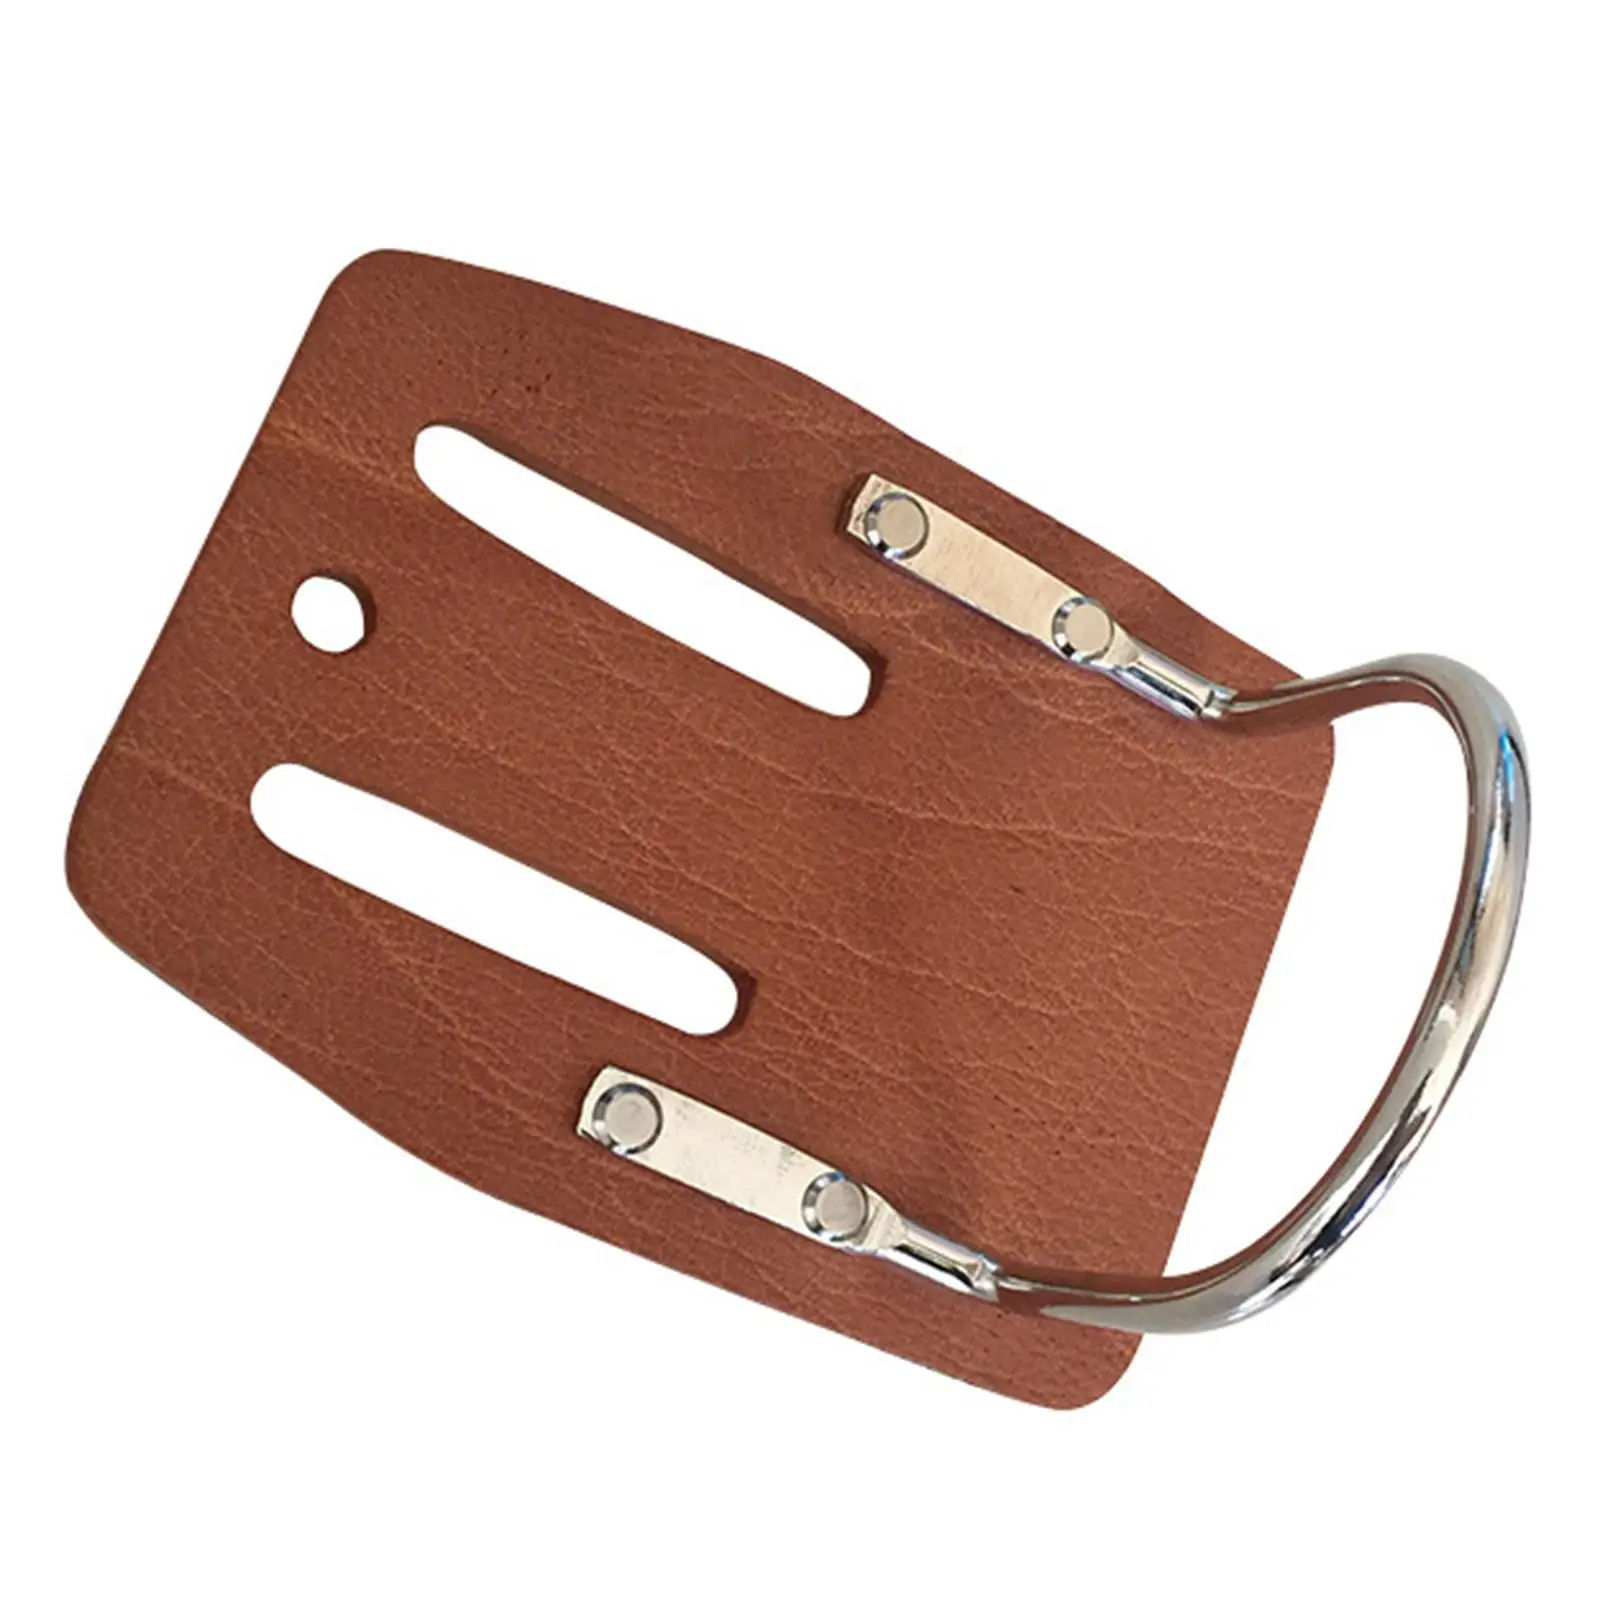 Multifunction PU Leather Hammer Holder PU Leather Pouch Bag for Handcraft